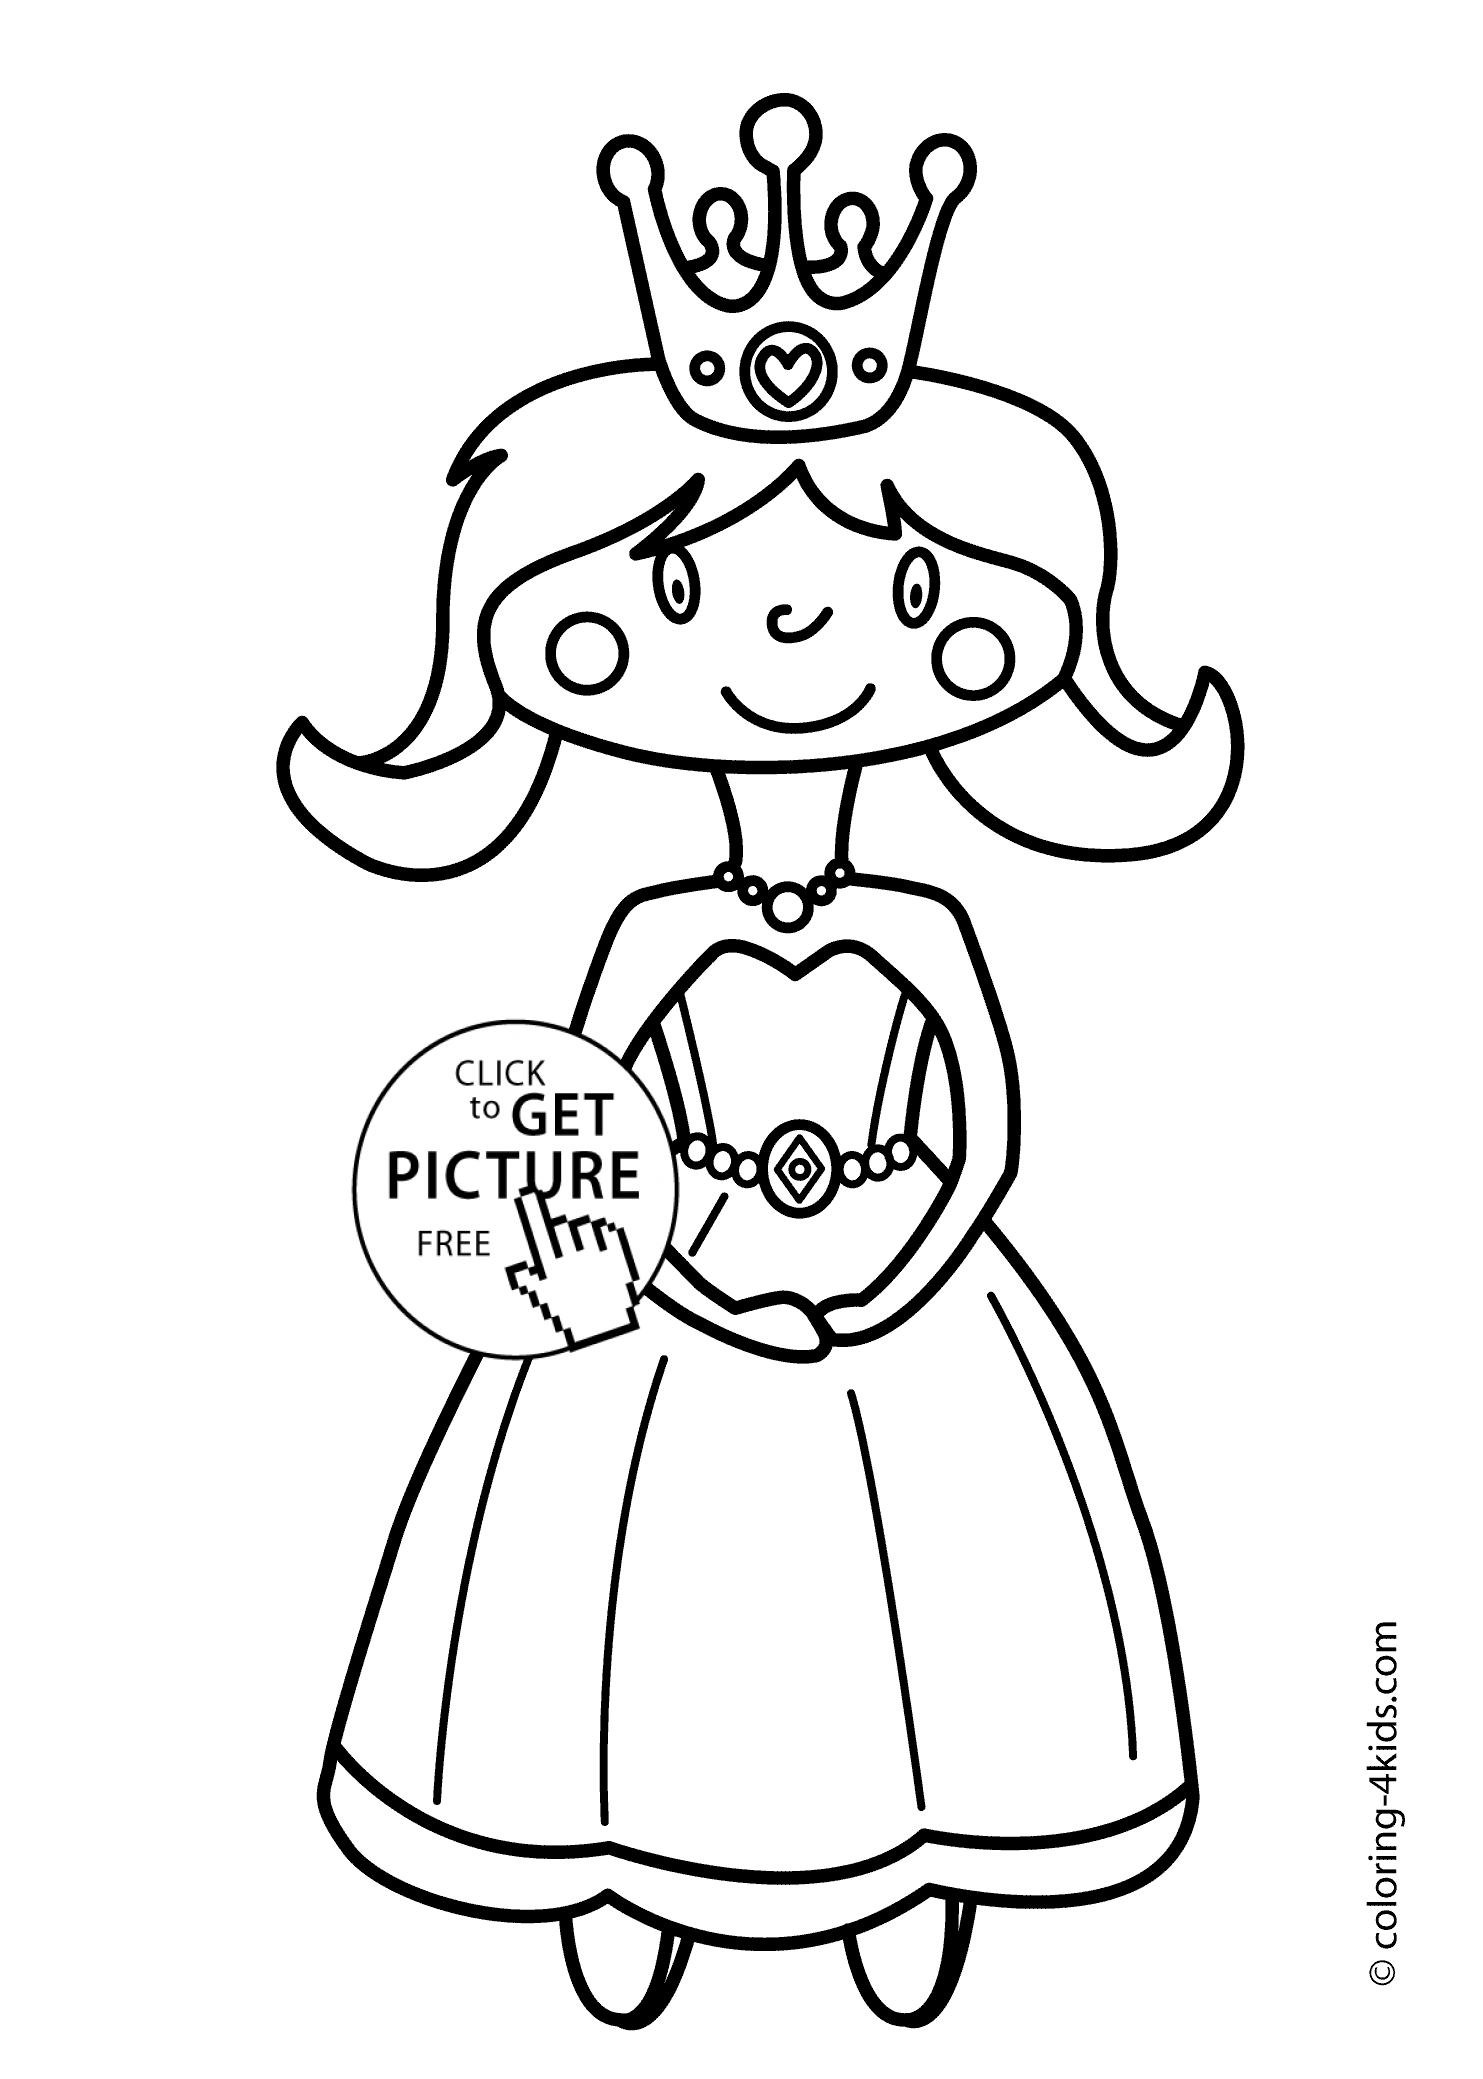 Girl Color Pages Cute Princesse Coloring Pages For Girls Printable Coloring Pages